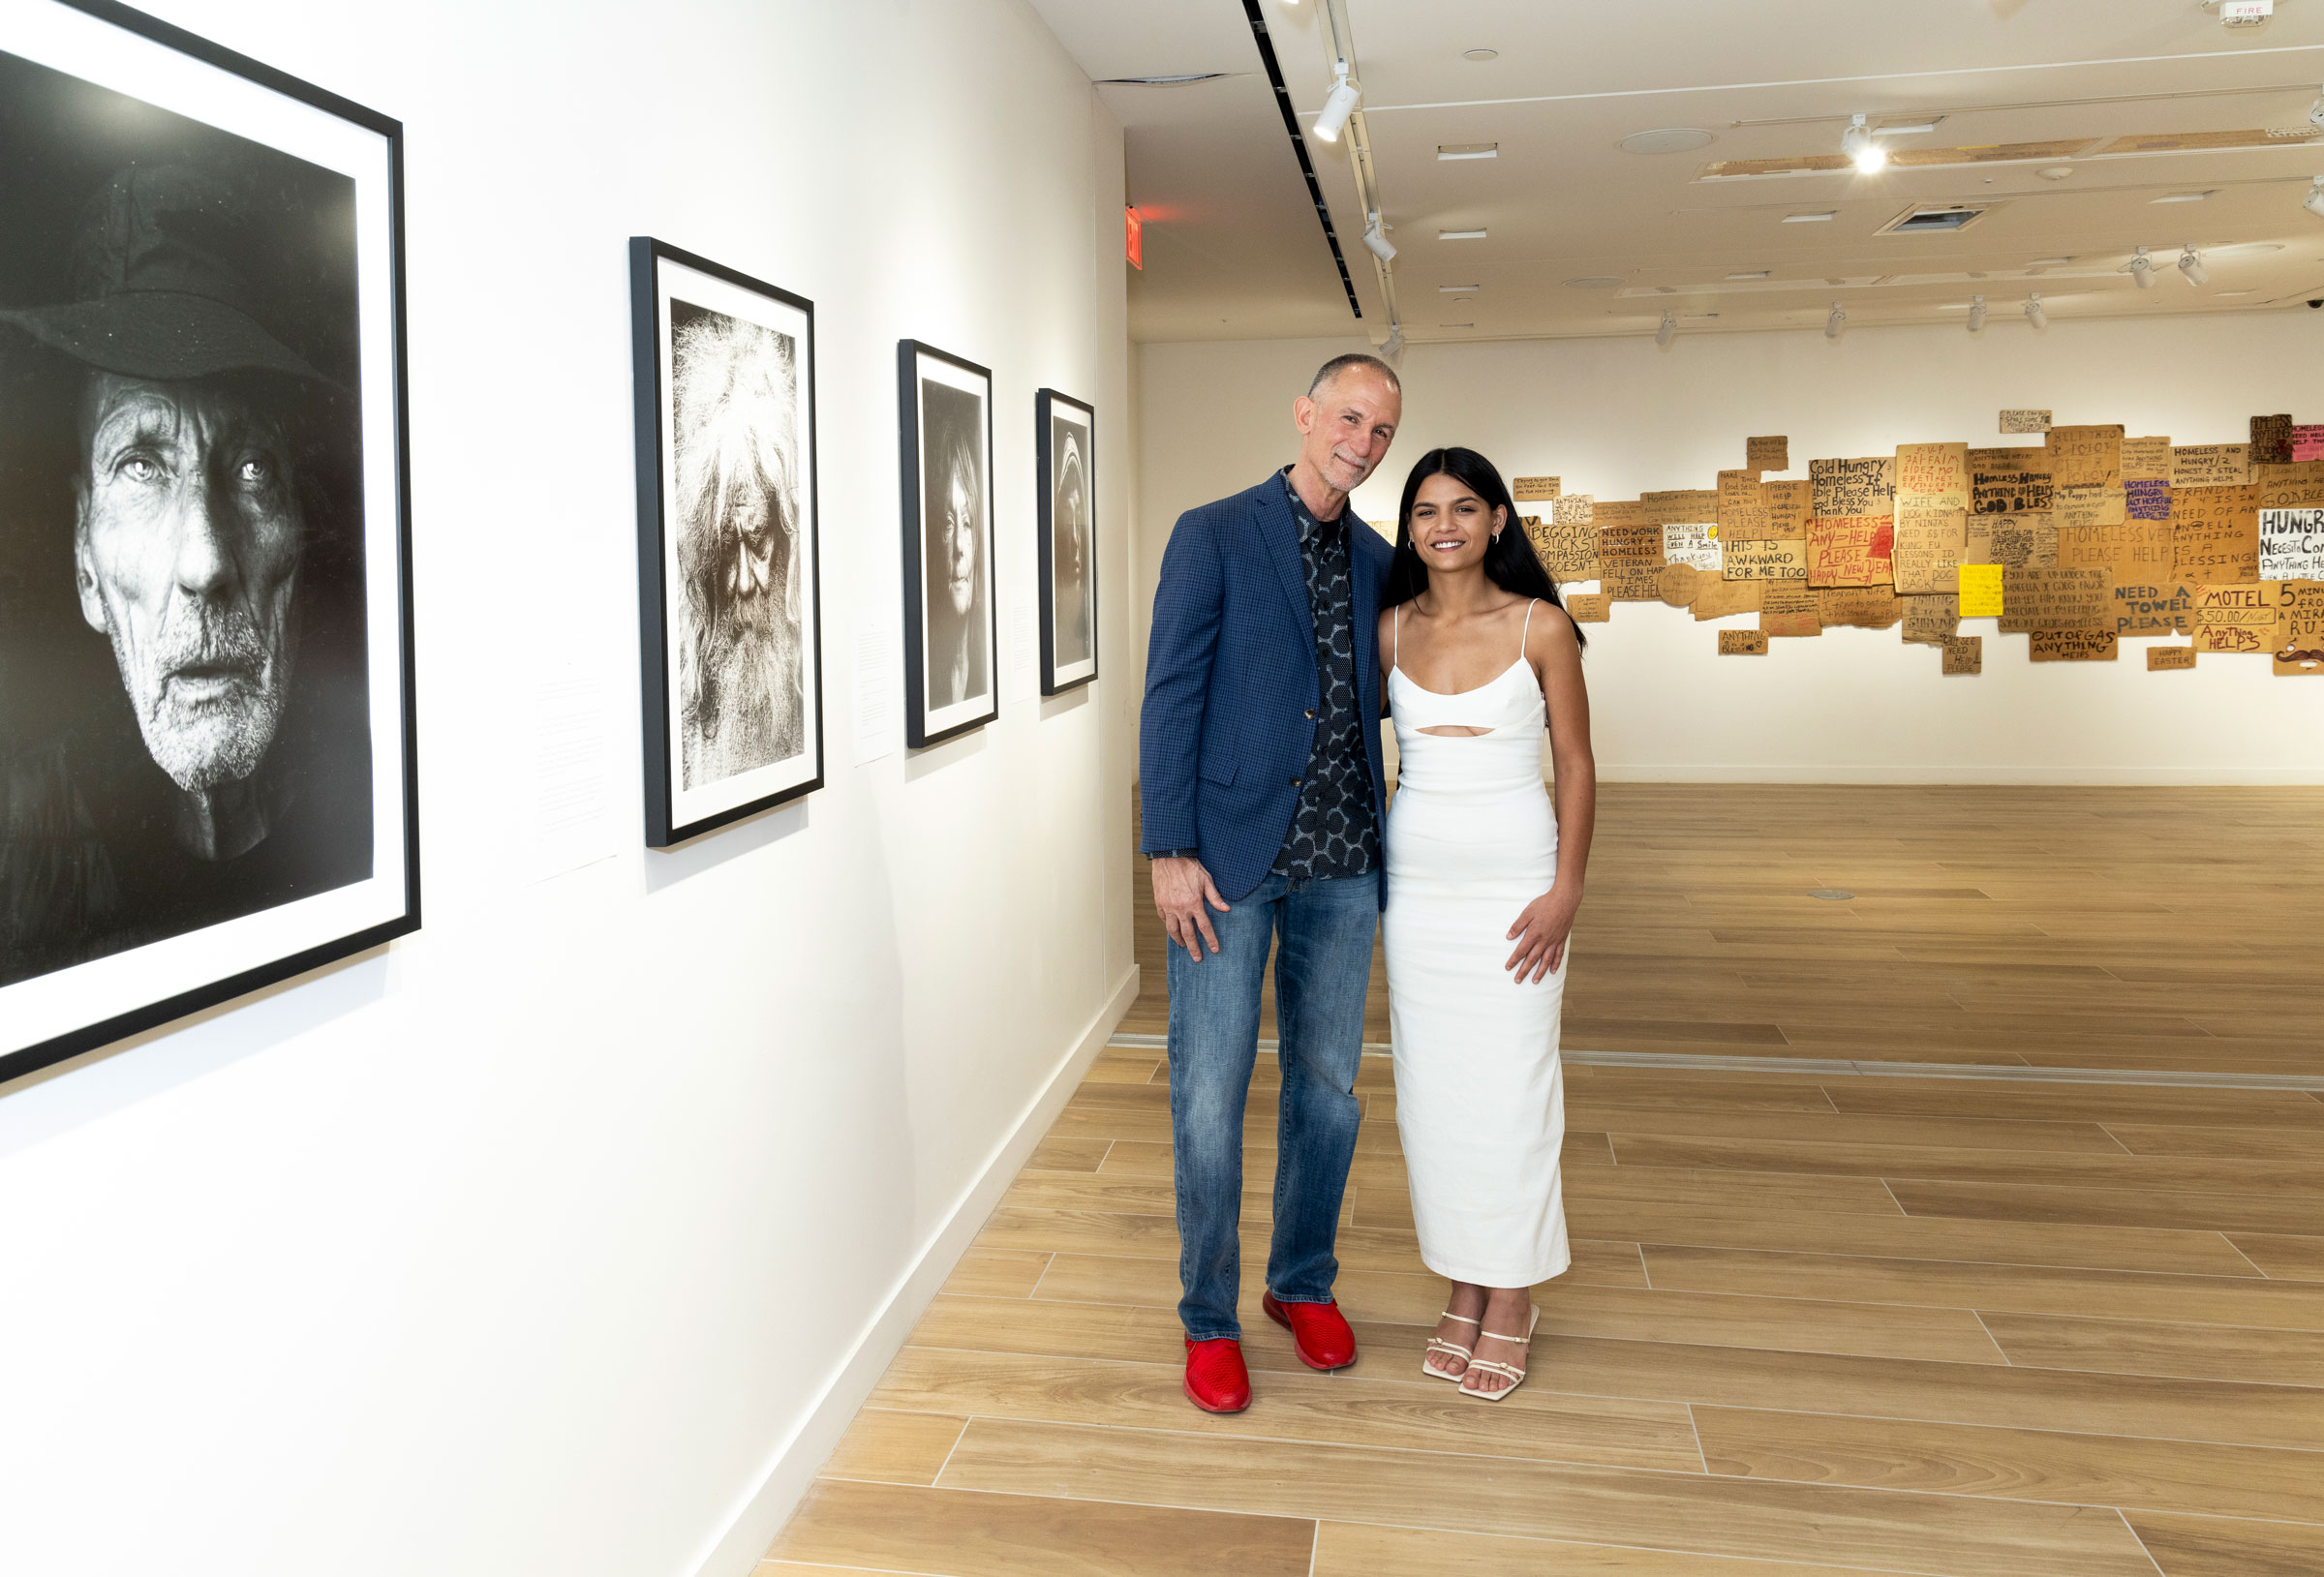 Artists Willie Baronet and Leah den Bok pose in the gallery of their exhibition.